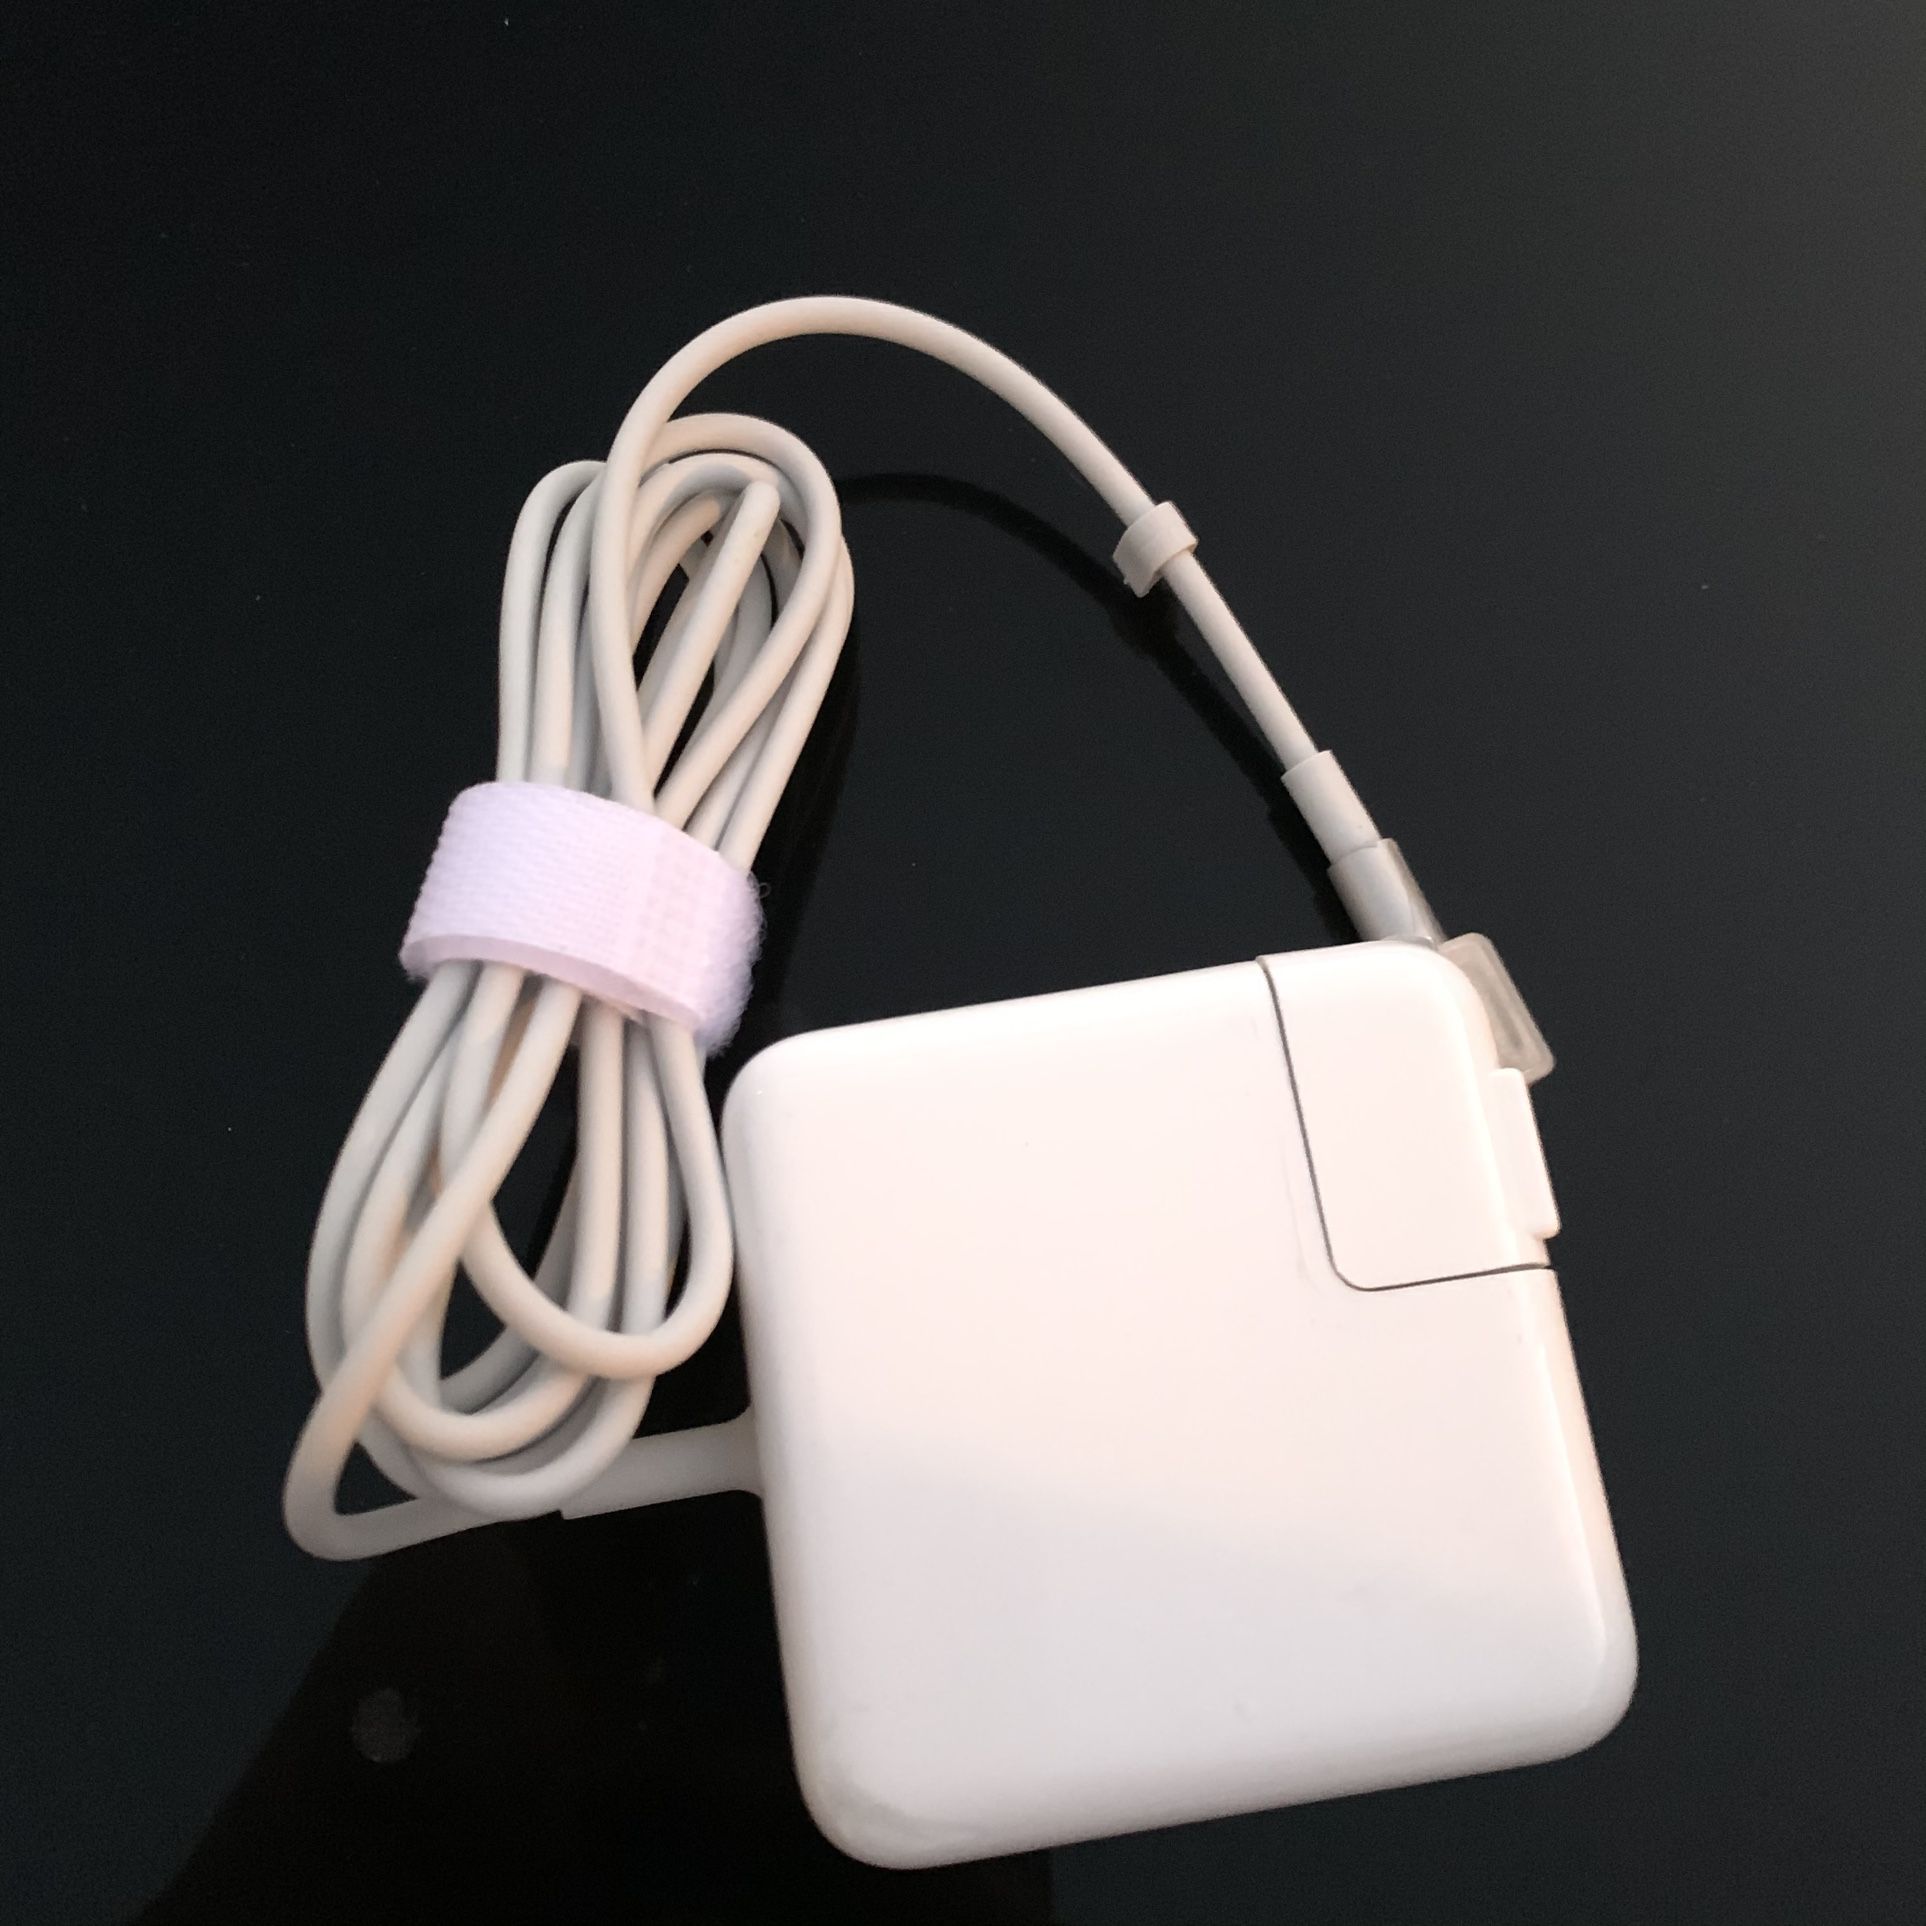 MacBook Pro Charger